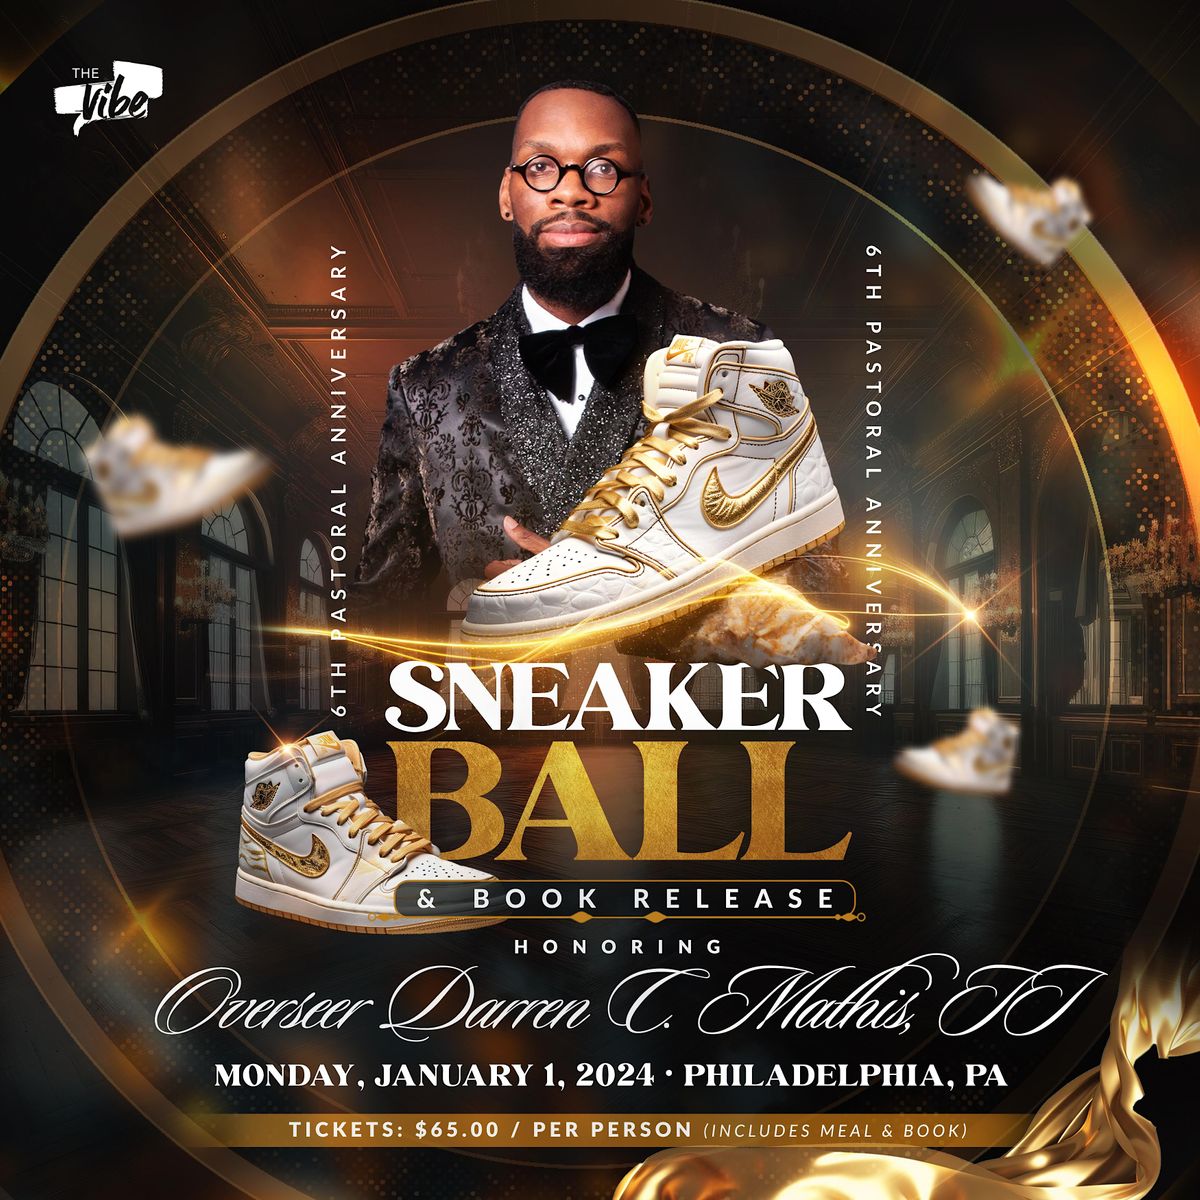 The Vibe 6th Anniversary Sneaker Ball & Book Release